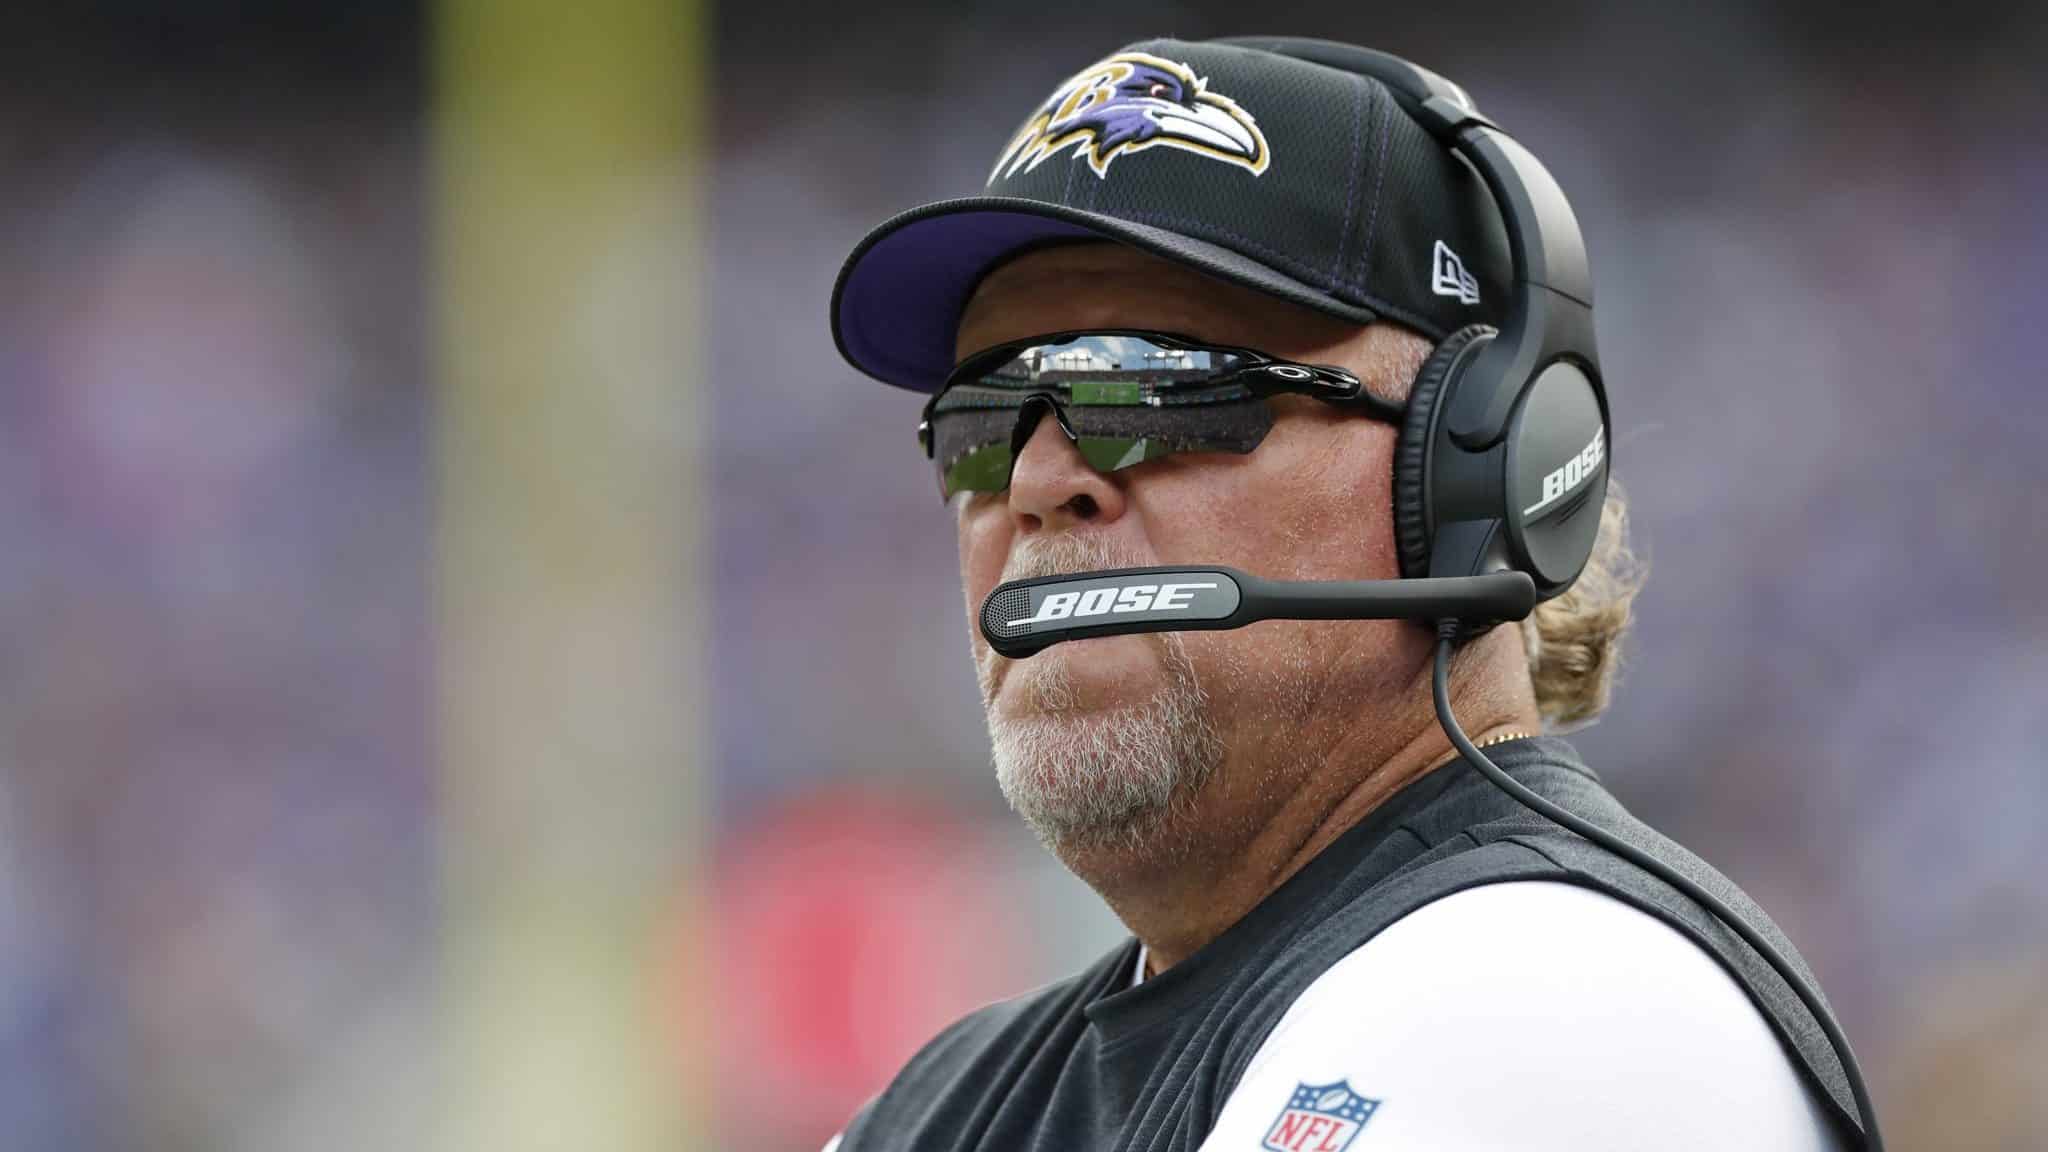 BALTIMORE, MARYLAND - SEPTEMBER 29: Baltimore Ravens Defensive Coordinator Don Martindale looks on from the sidelines during the first half against the Cleveland Browns at M&T Bank Stadium on September 29, 2019 in Baltimore, Maryland.